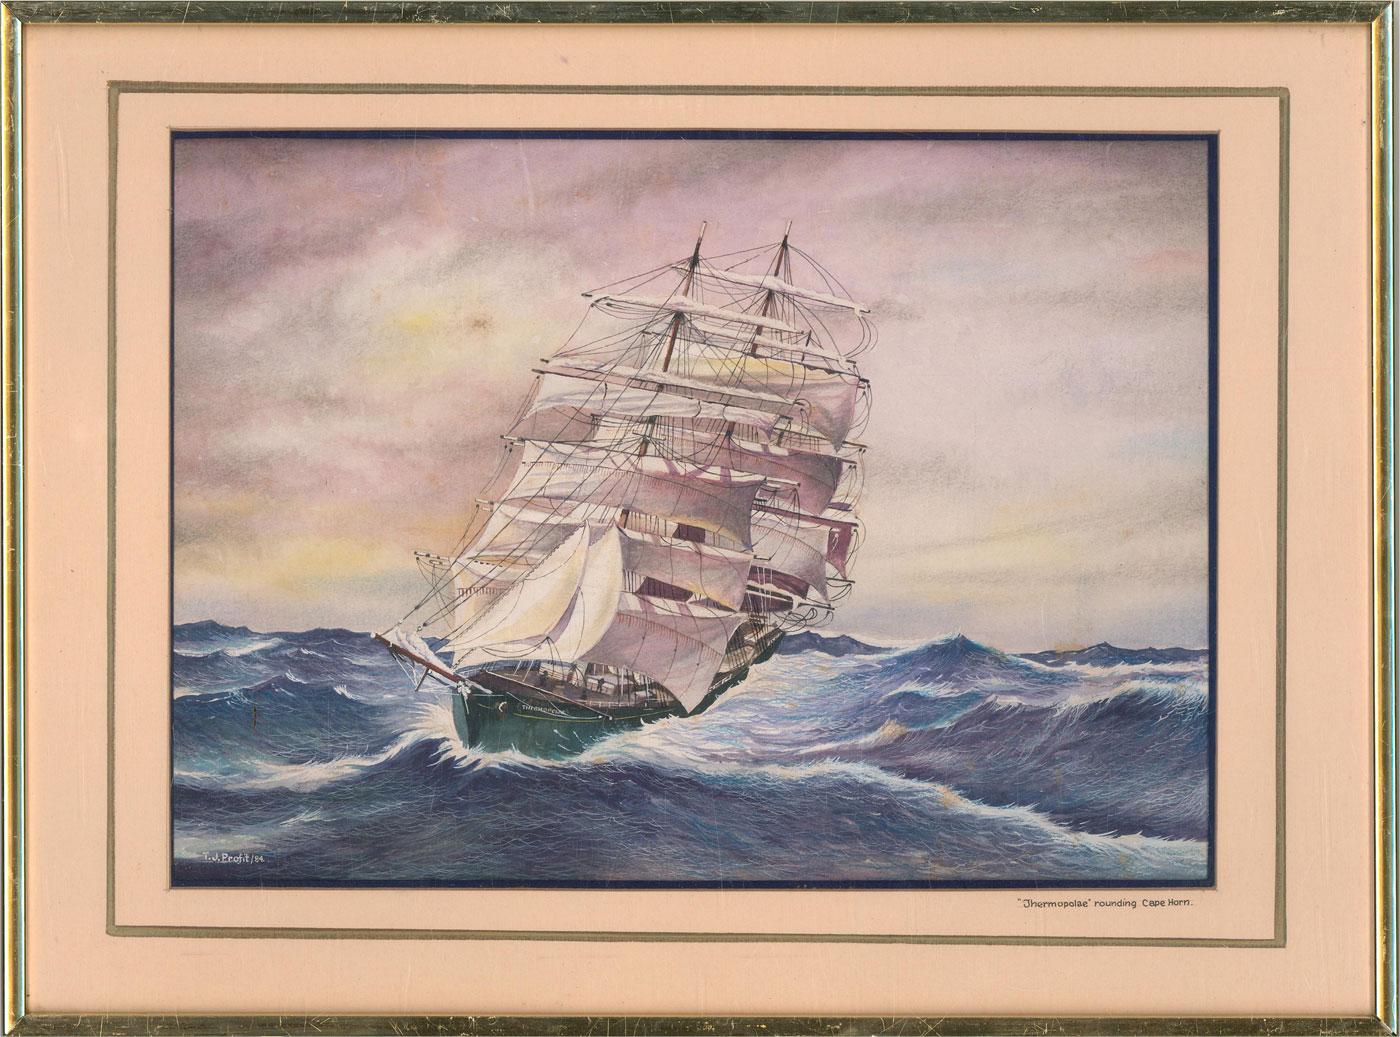 Gouache highlights finish a marvelous study of

Thermopylae, a 19th-century clipper.

The artwork is signed, dated, and inscribed.

Well presented in a gilt effect metal frame with a wash line double mount.

On wove.